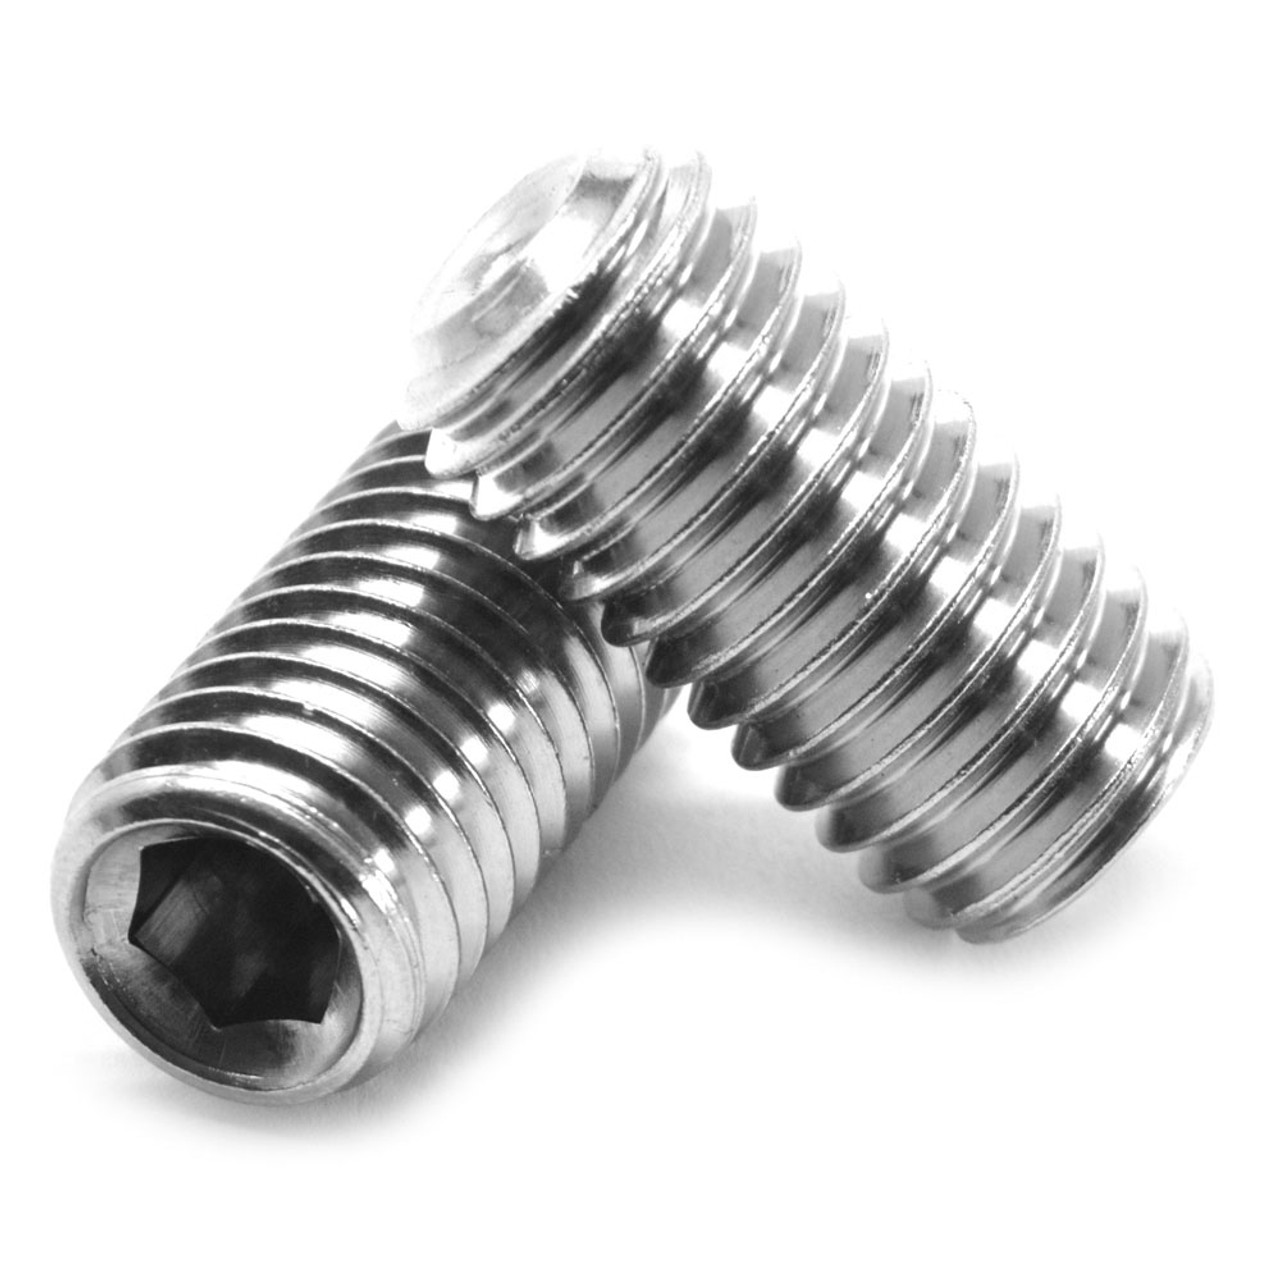 M8 x 1.25 x 10 MM Coarse Thread Socket Set Screw Cup Point Stainless Steel 18-8